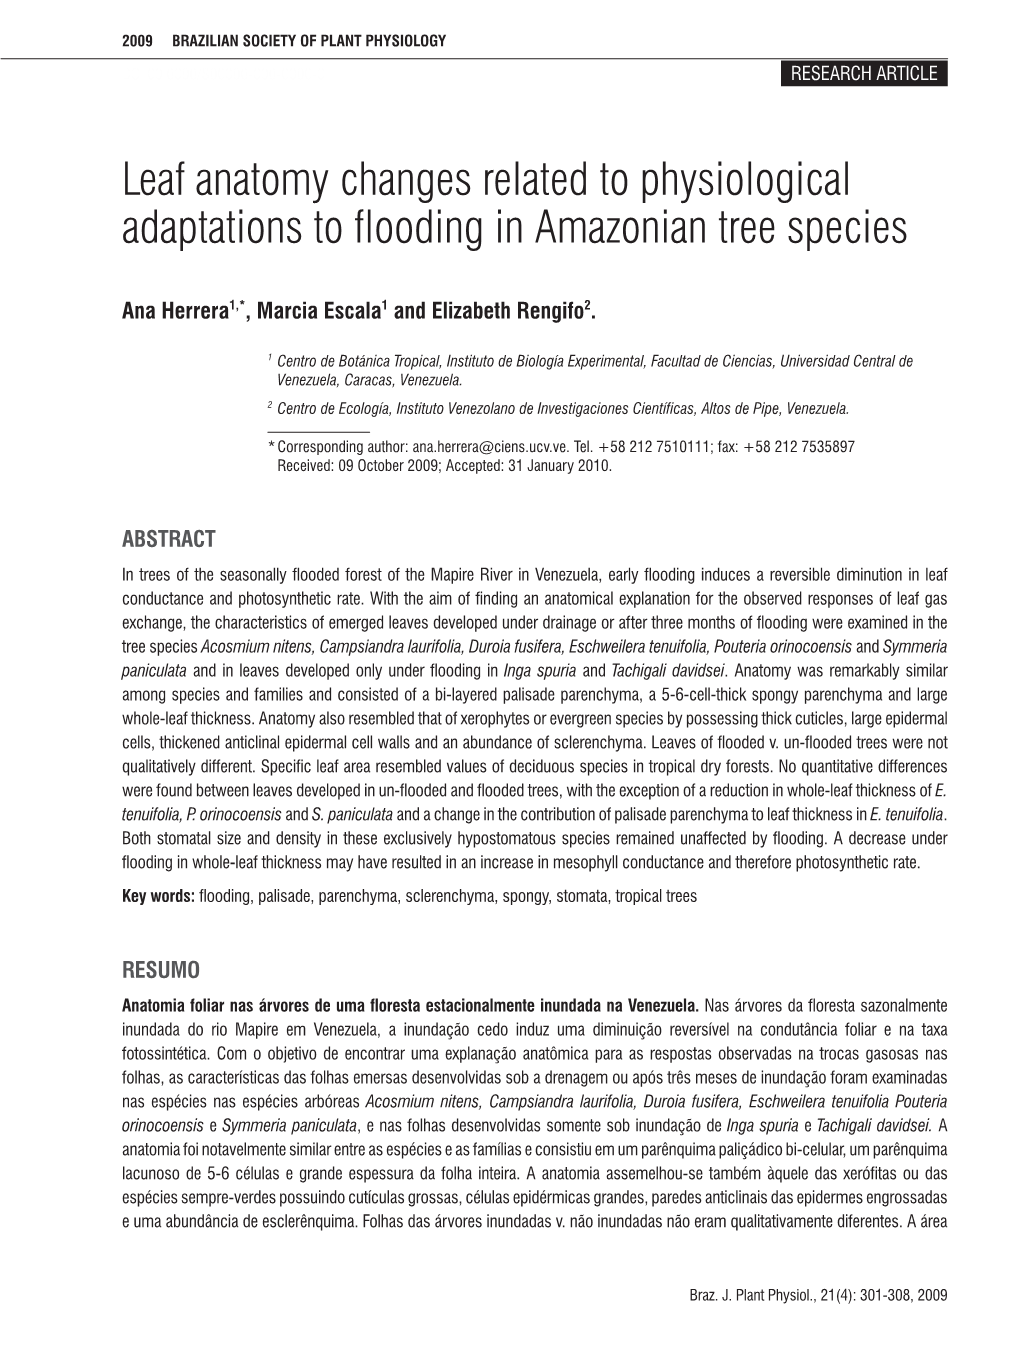 Leaf Anatomy Changes Related to Physiological Adaptations to Flooding in Amazonian Tree Species